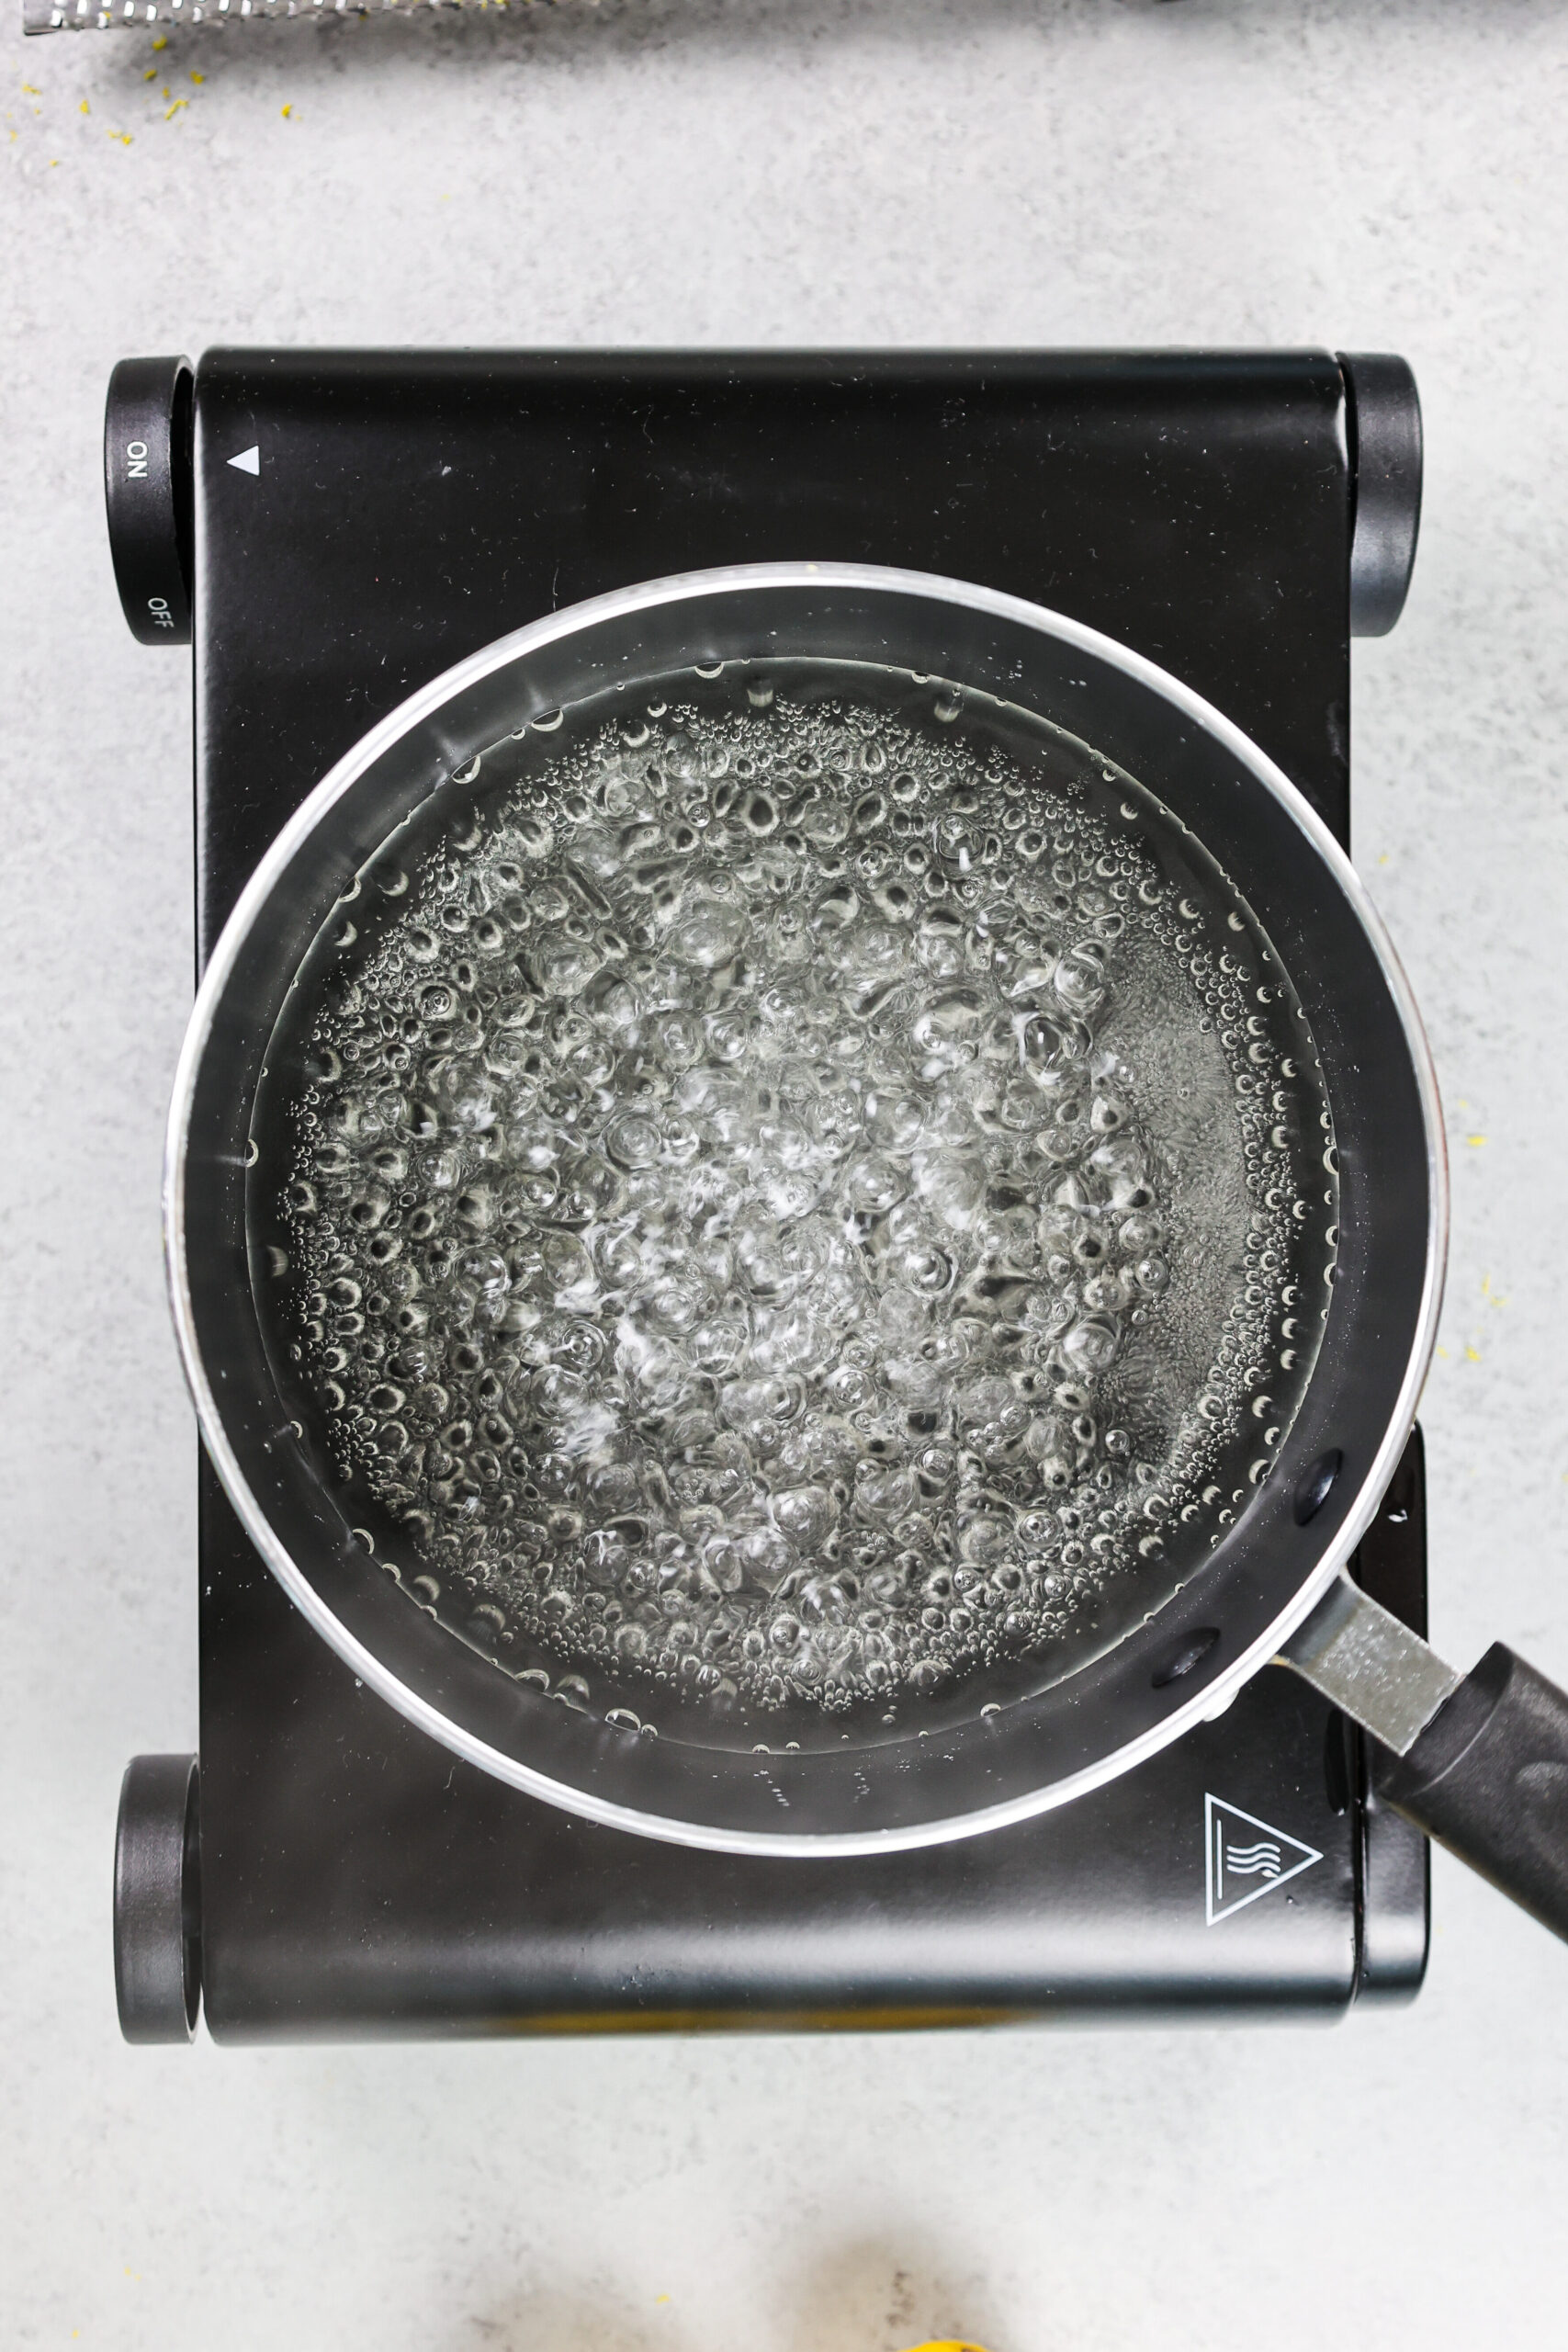 image of simple syrup being brought to a boil to dissolve the sugar